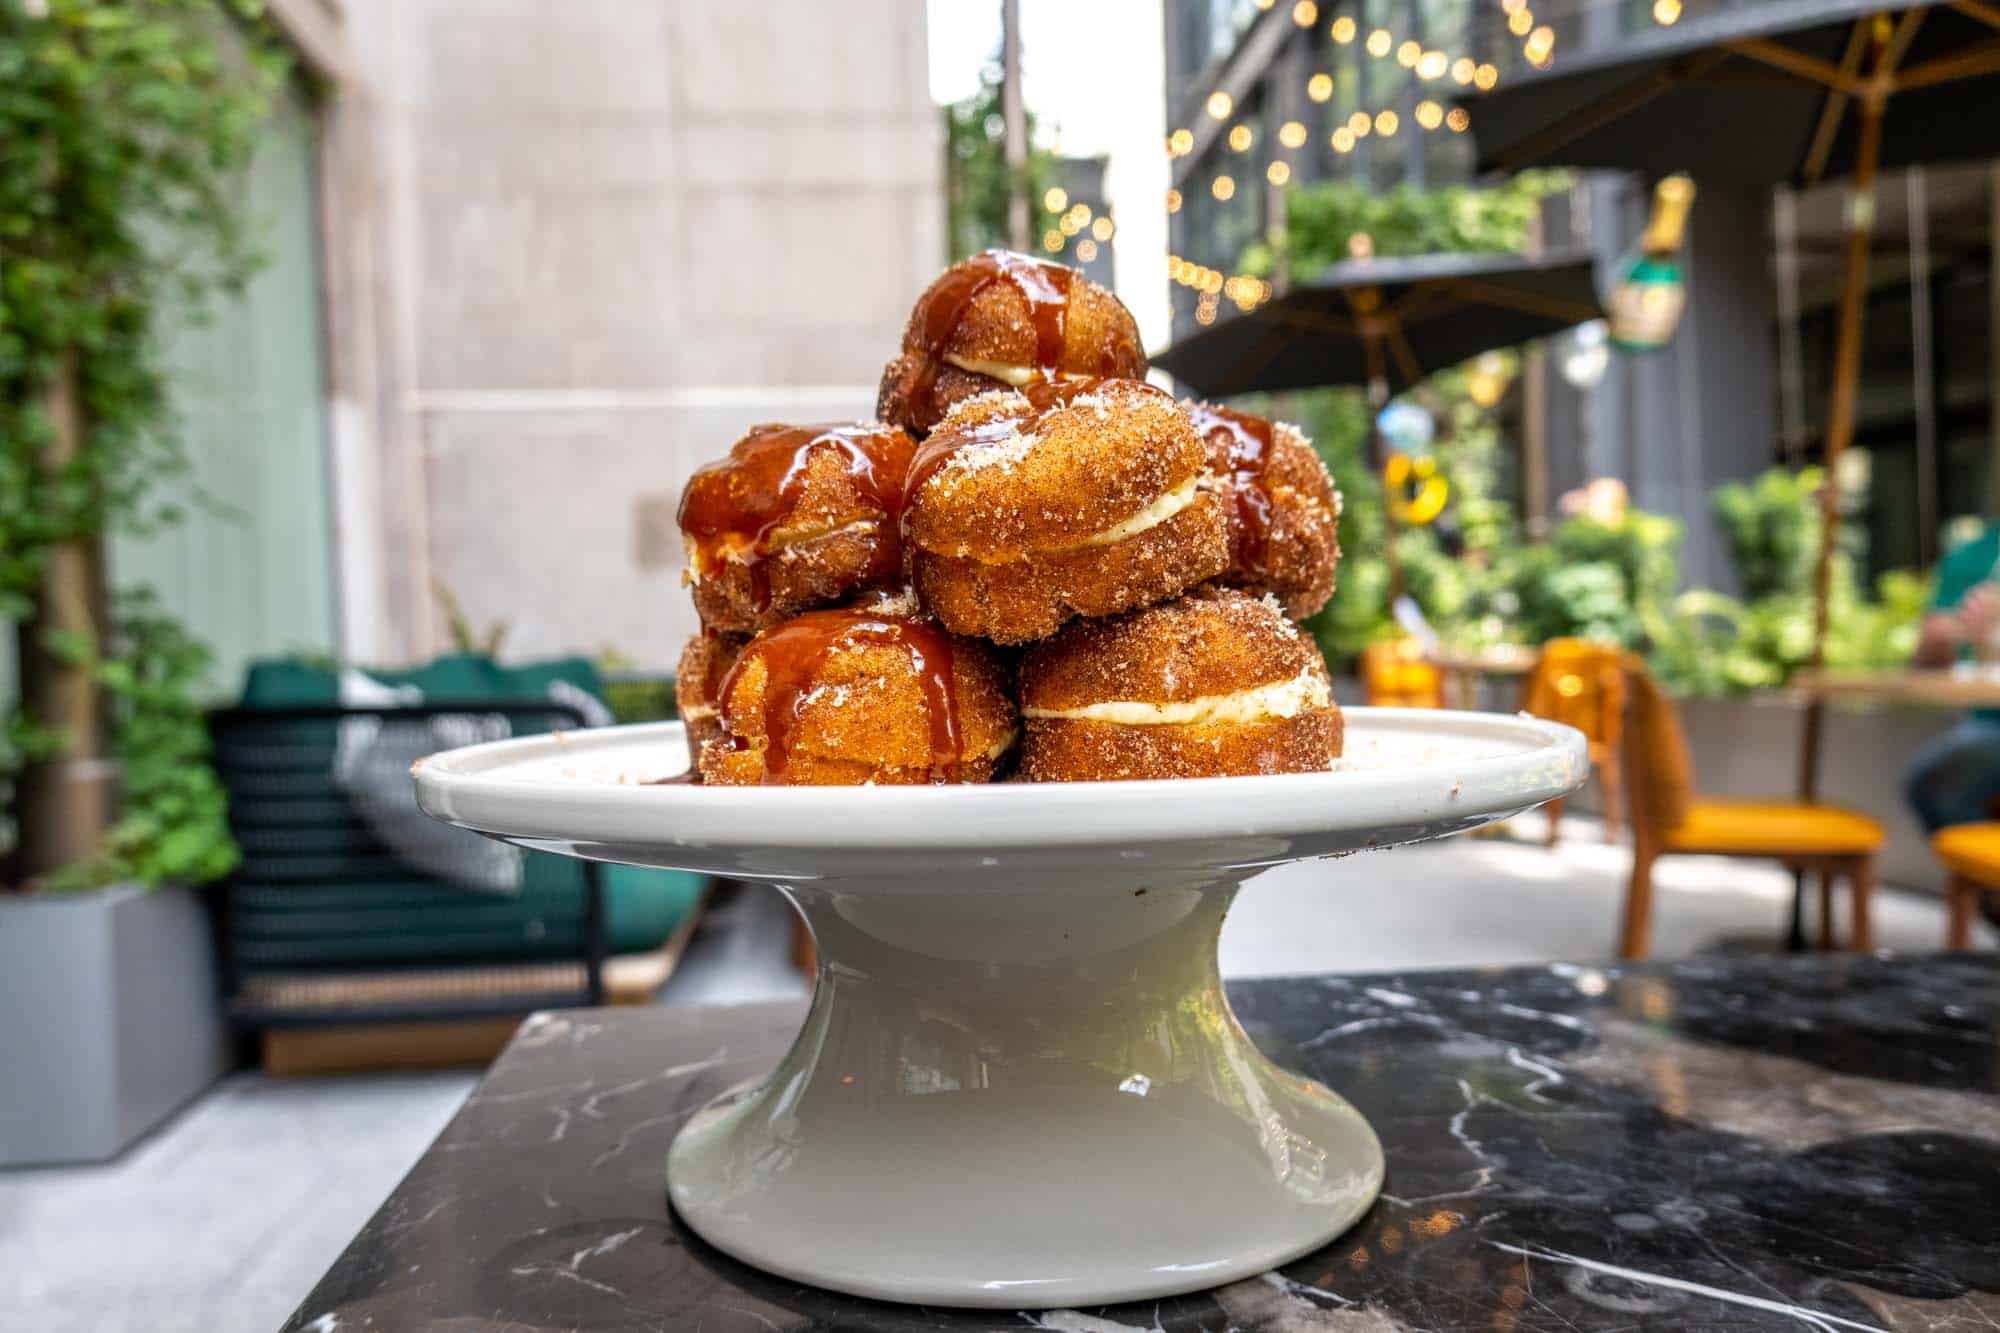 Pile of cinnamon-sugar-covered donuts on a platter on an outside table